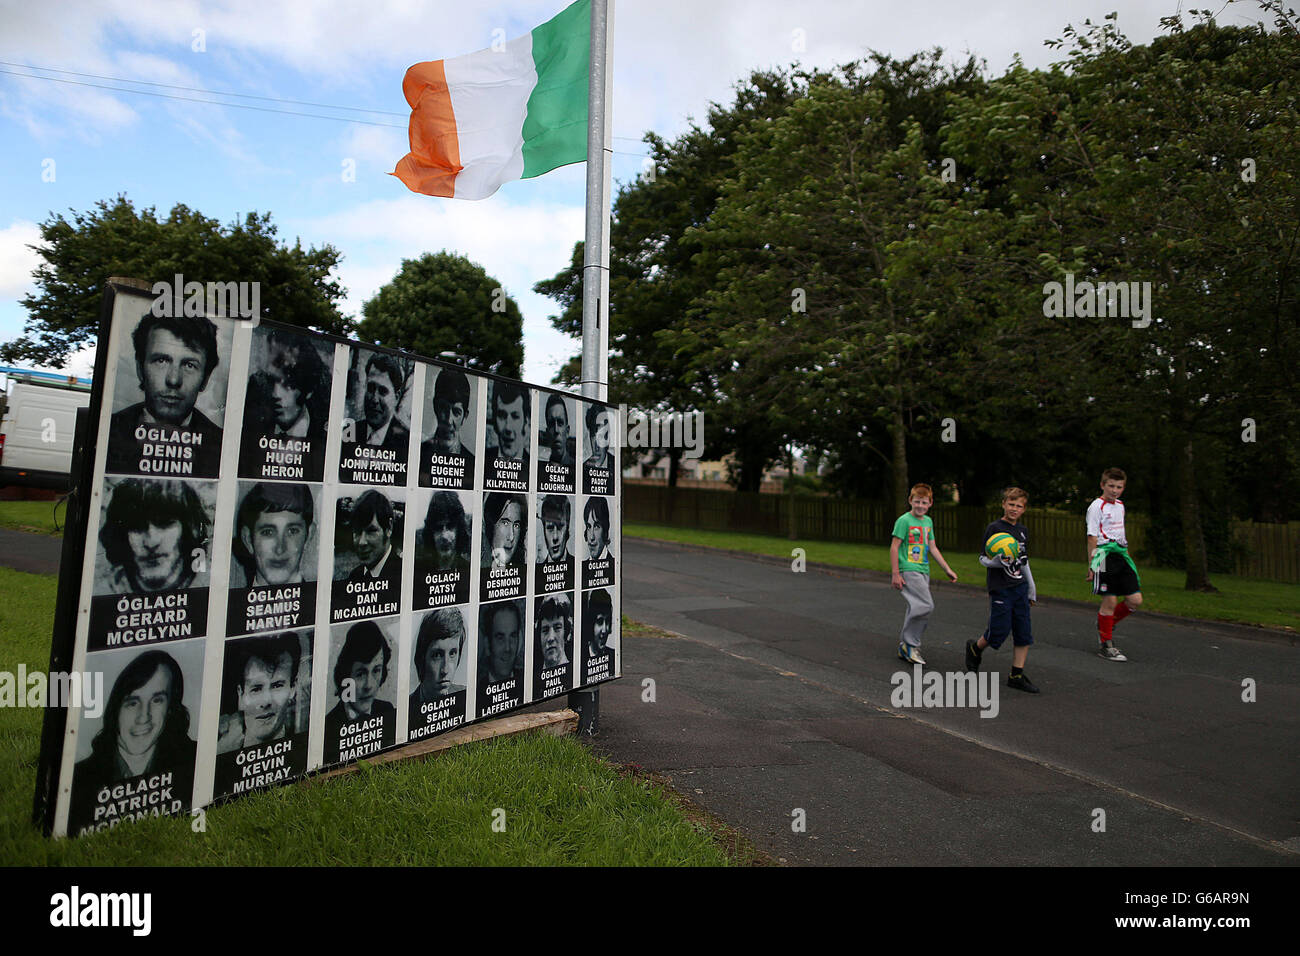 A placard commemorating IRA volunteers in a housing estate in Castlederg, County Tyrone ahead of the controversial parade by IRA supporters. Stock Photo